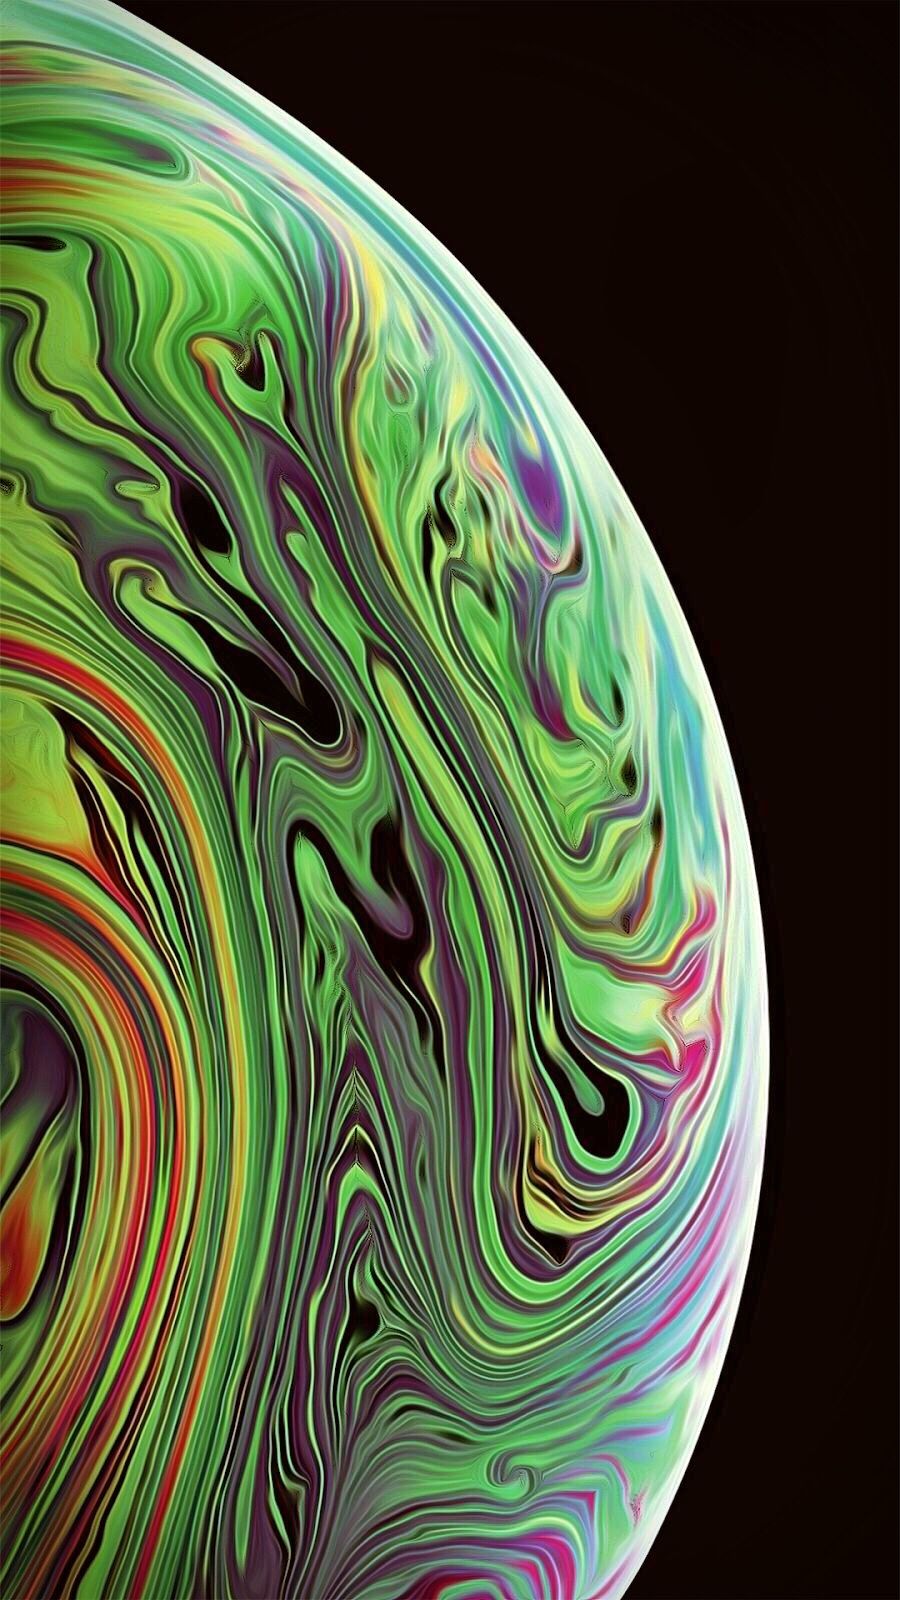 iphone xs 4k wallpapers wallpaper cave on iphone xs 4k wallpapers